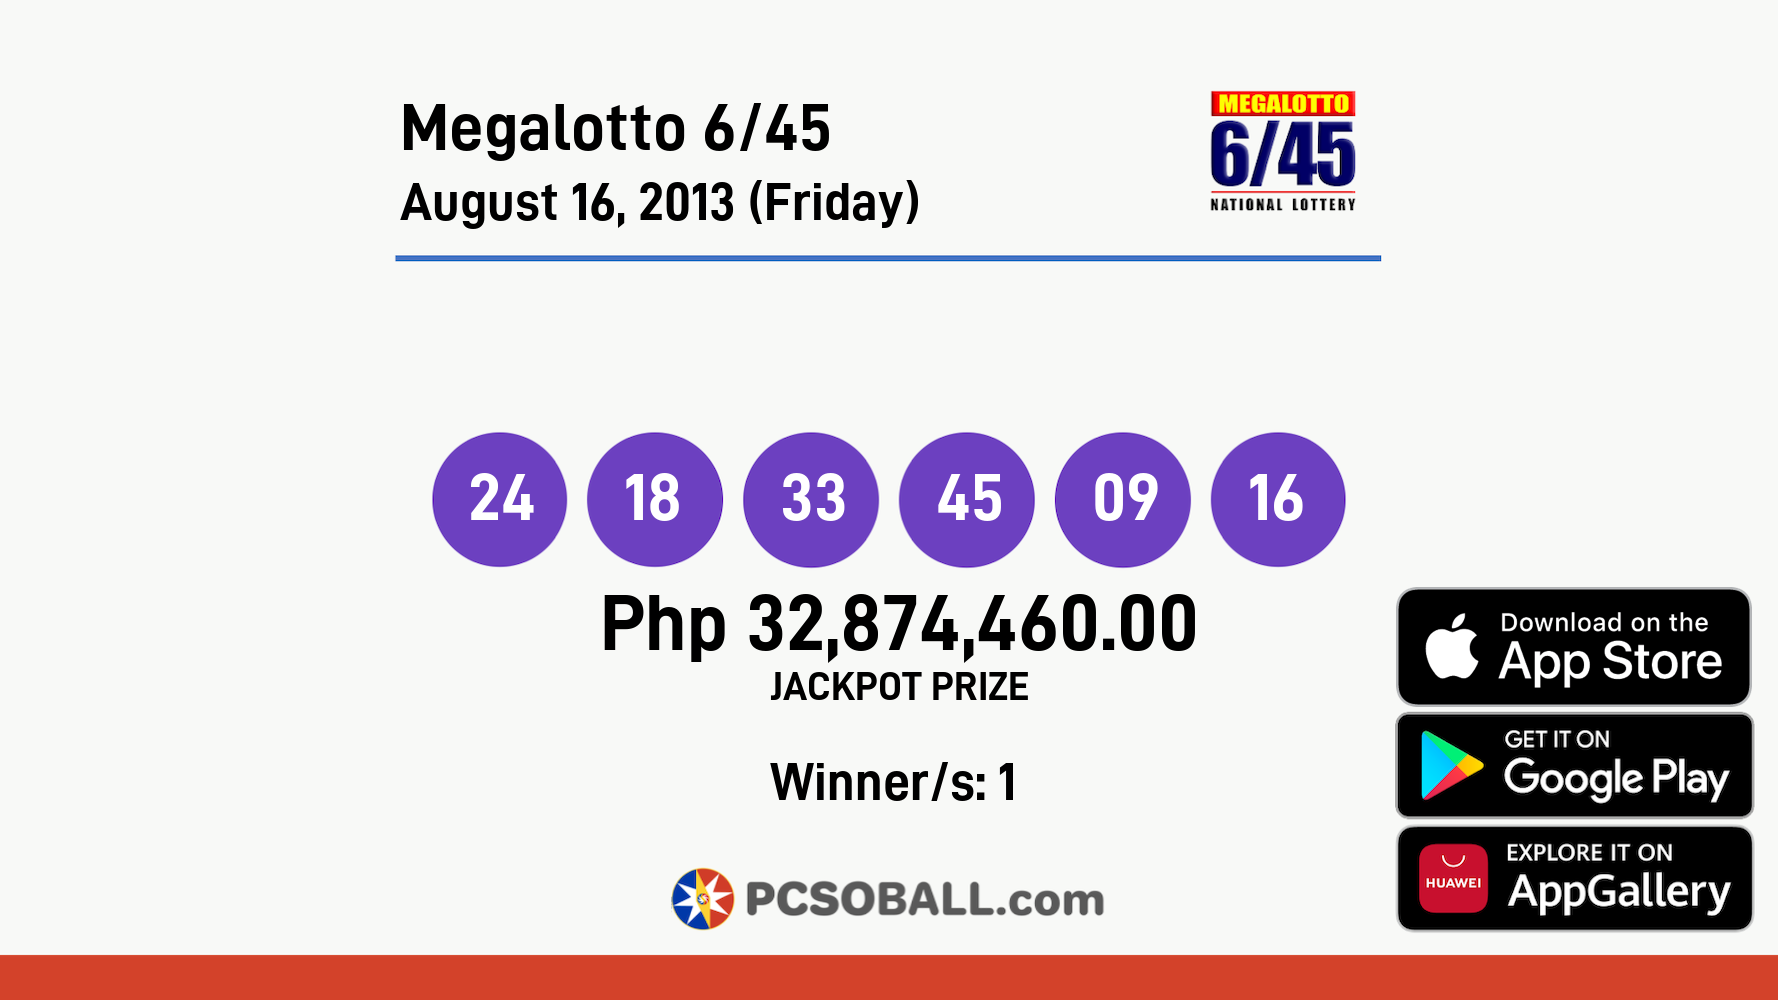 Megalotto 6/45 August 16, 2013 (Friday) Result